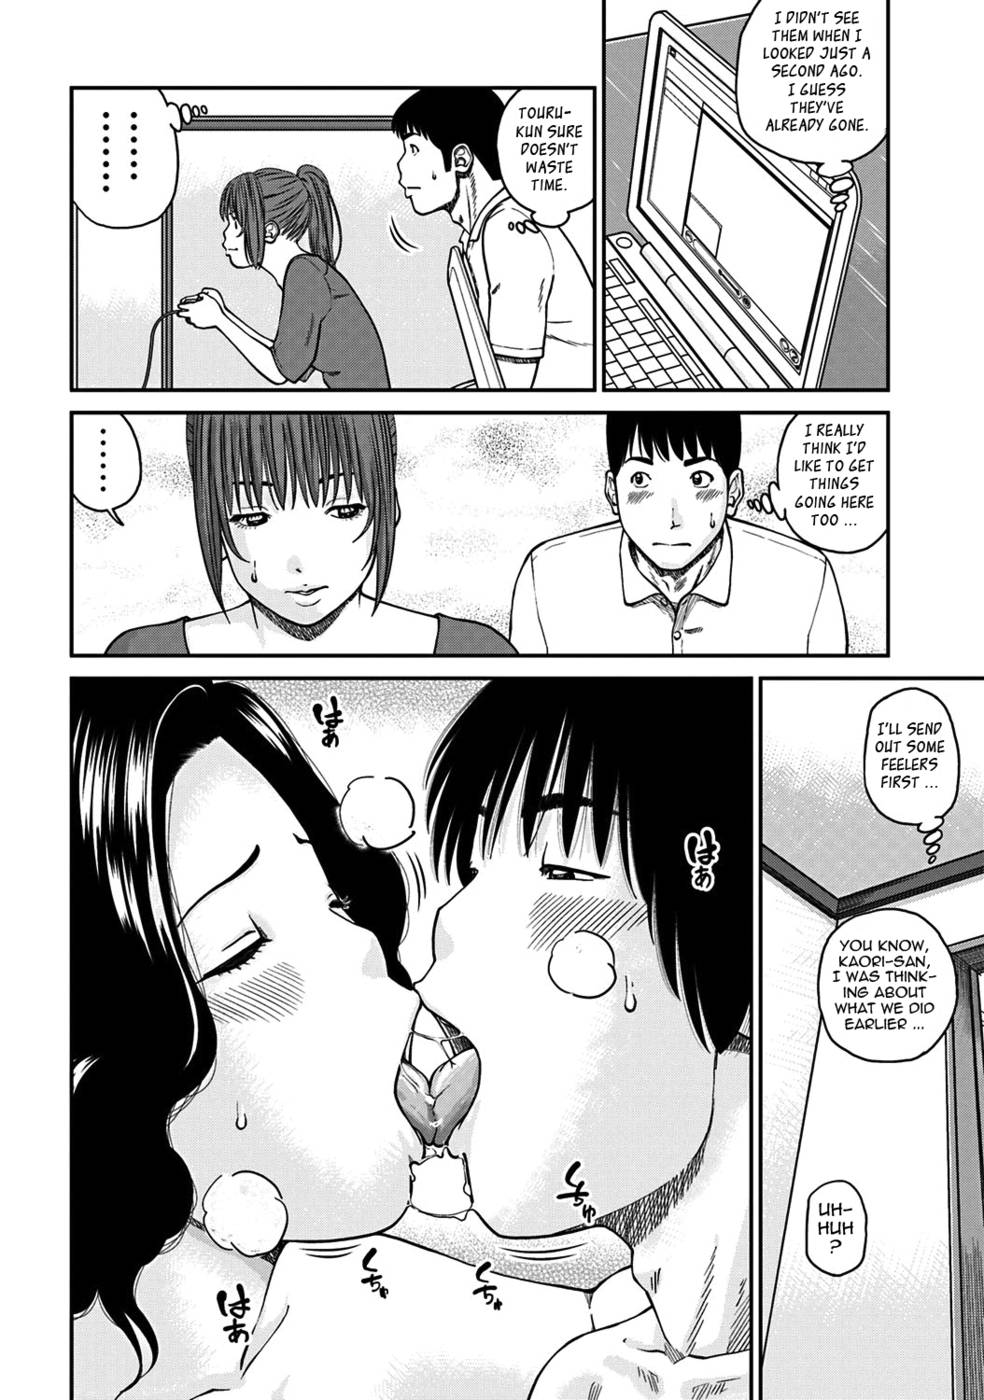 Hentai Manga Comic-33 Year Old Unsatisfied Wife-Chapter 4-Spouse Swapping-Final Day-8